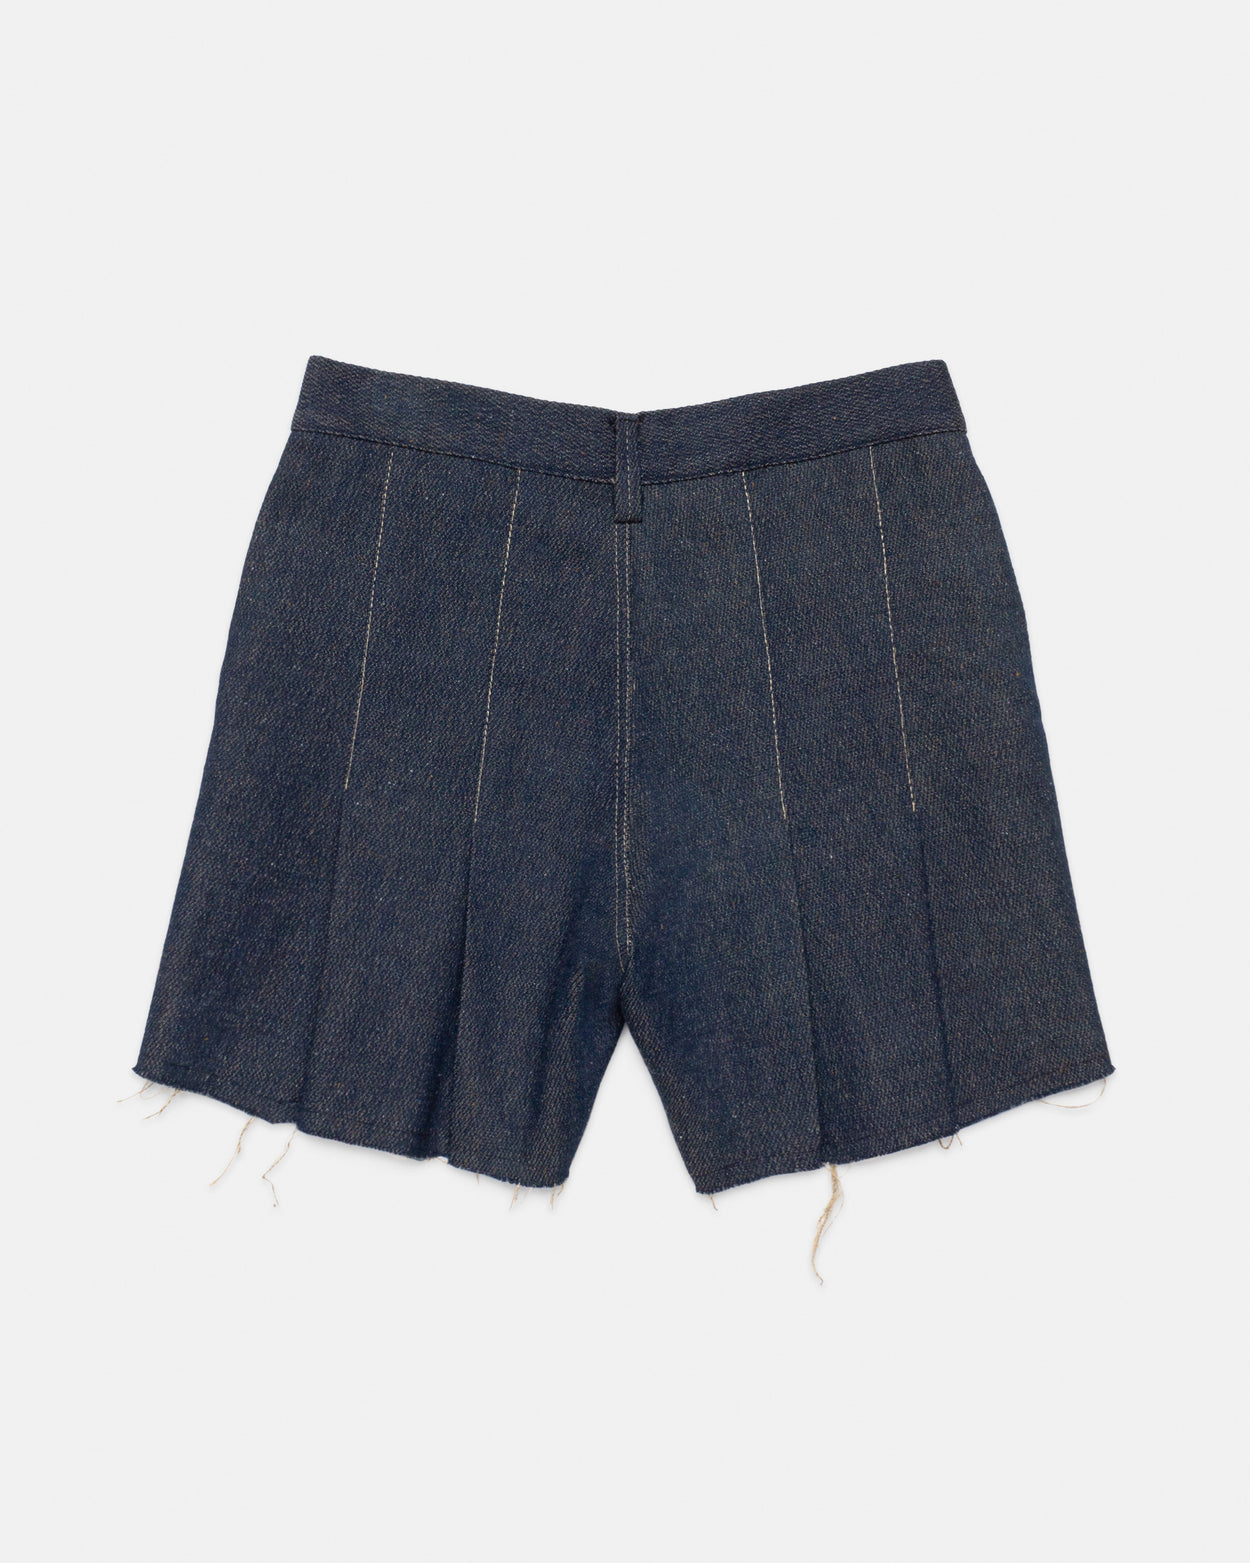 The Cut-off Shorts